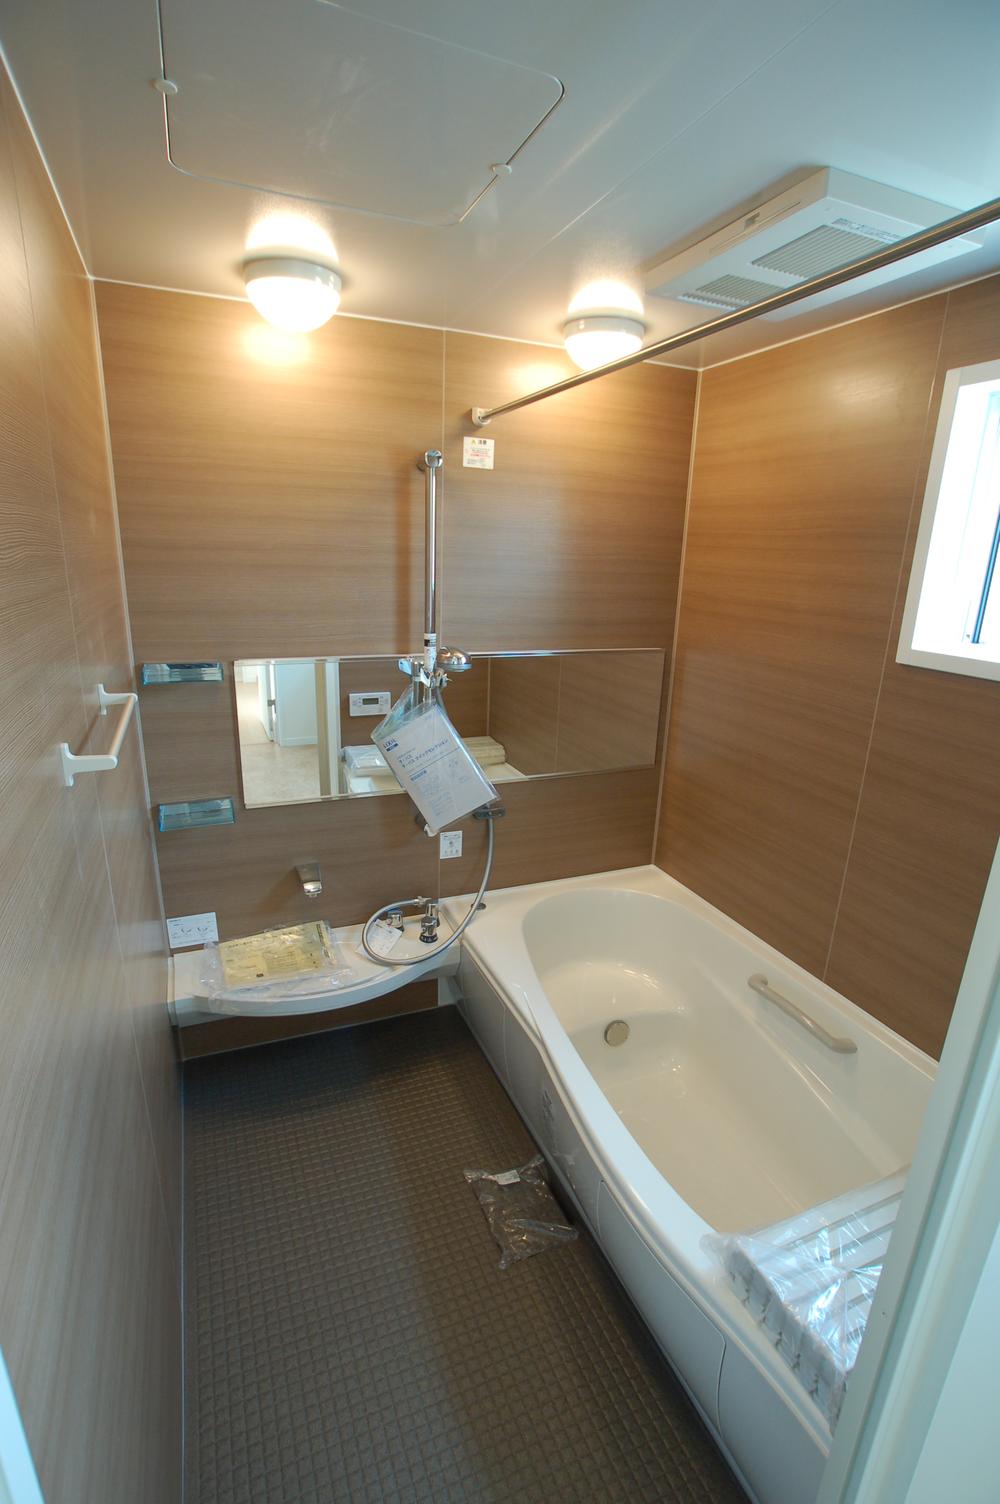 Same specifications photo (bathroom). Please heal the fatigue of adoption one day the artificial marble clean bathtub in the bathroom of 1 pyeong size. Of course showers are comfortable specification with a massage function and mist function. Also to the ease of cleaning were friendly. 